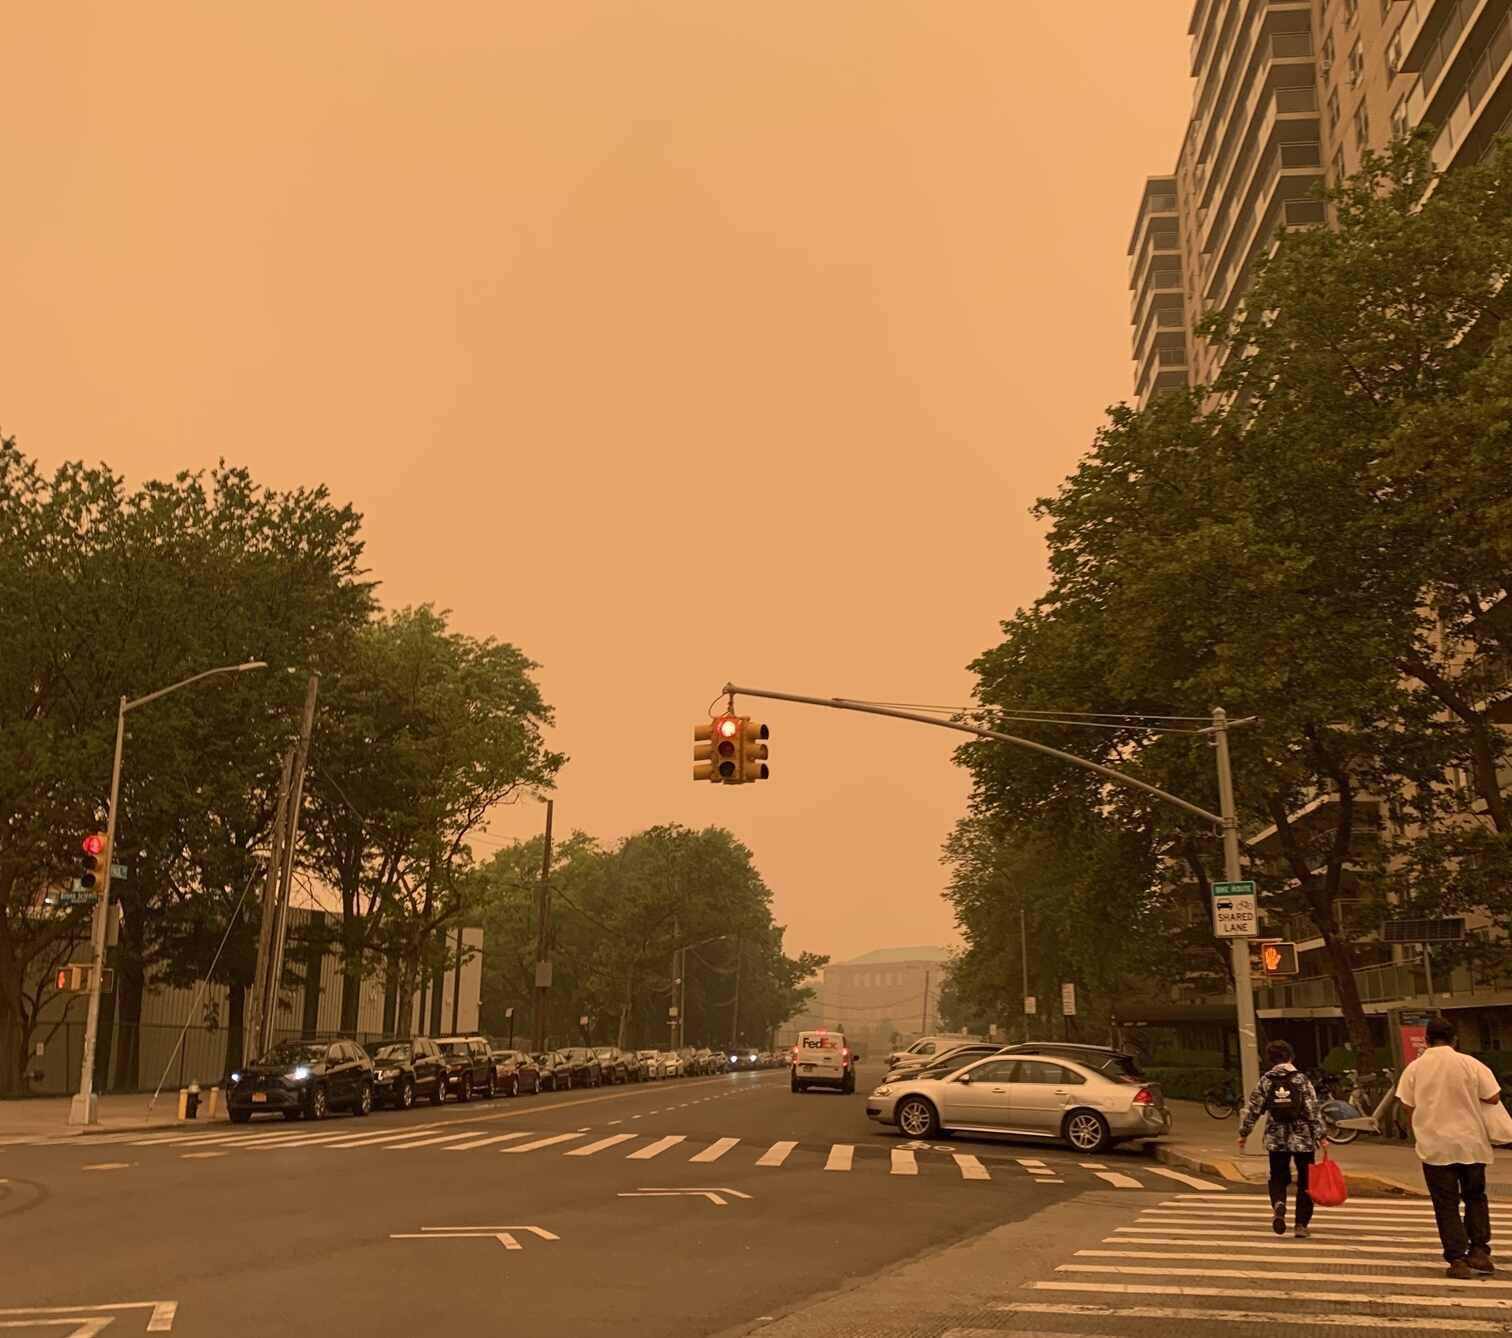 NYC’s Air is Hard to Breathe